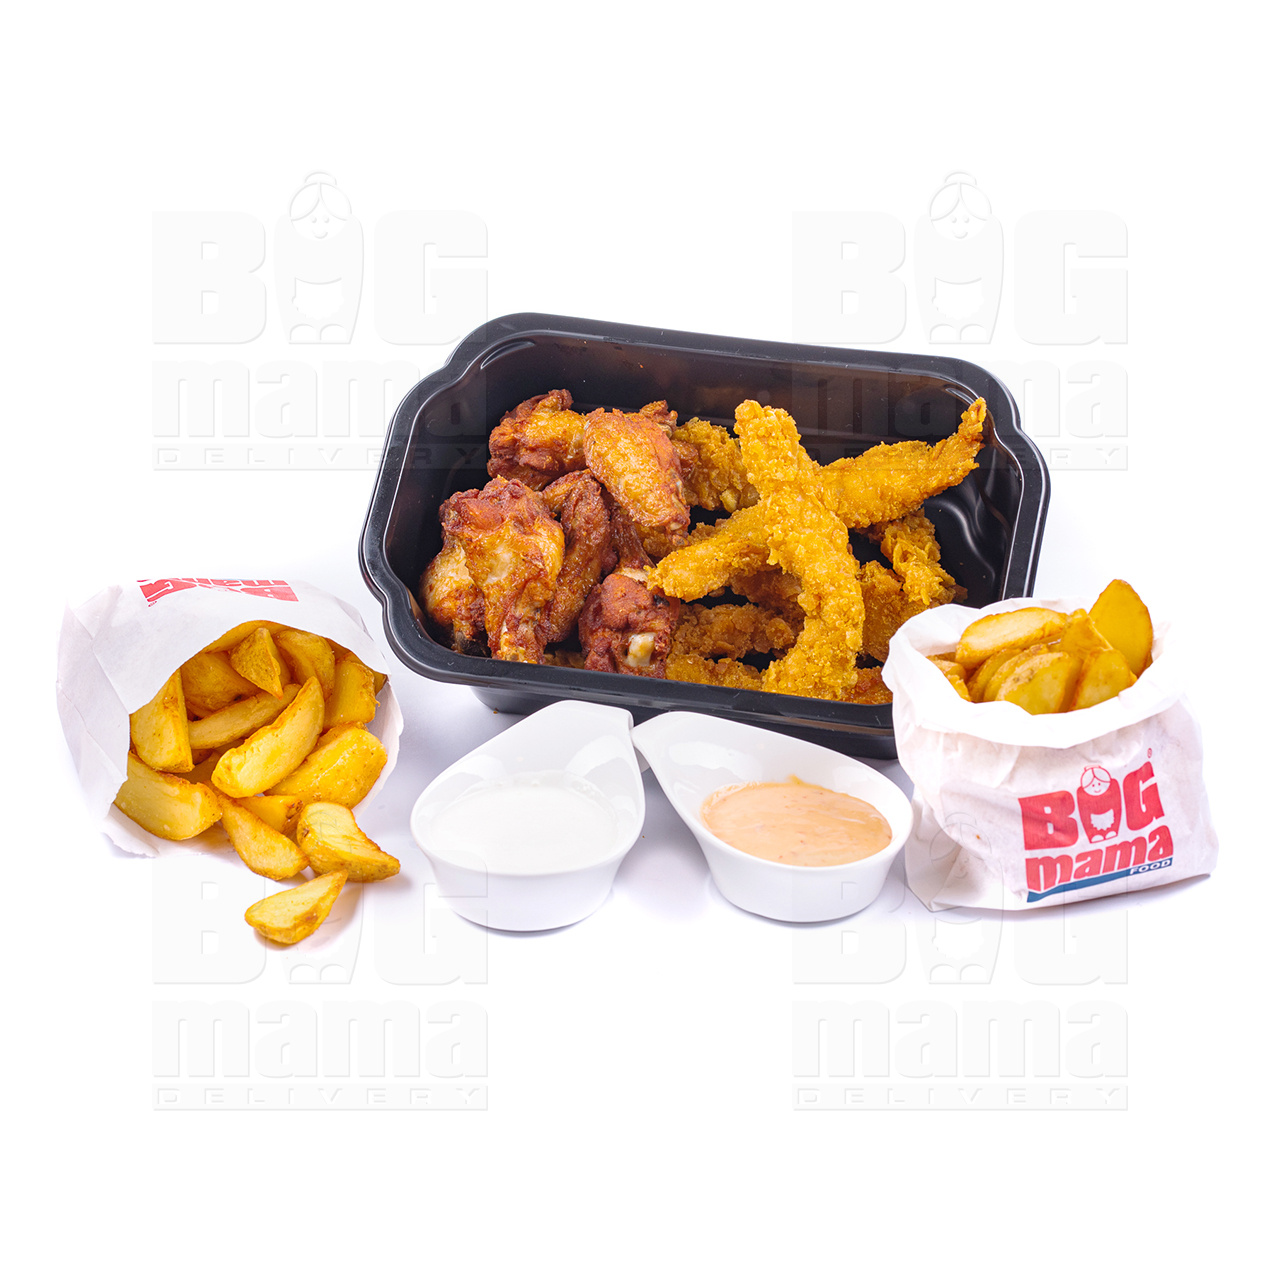 Product #229 image - Spicy chicken wings, chicken crispy combo menu